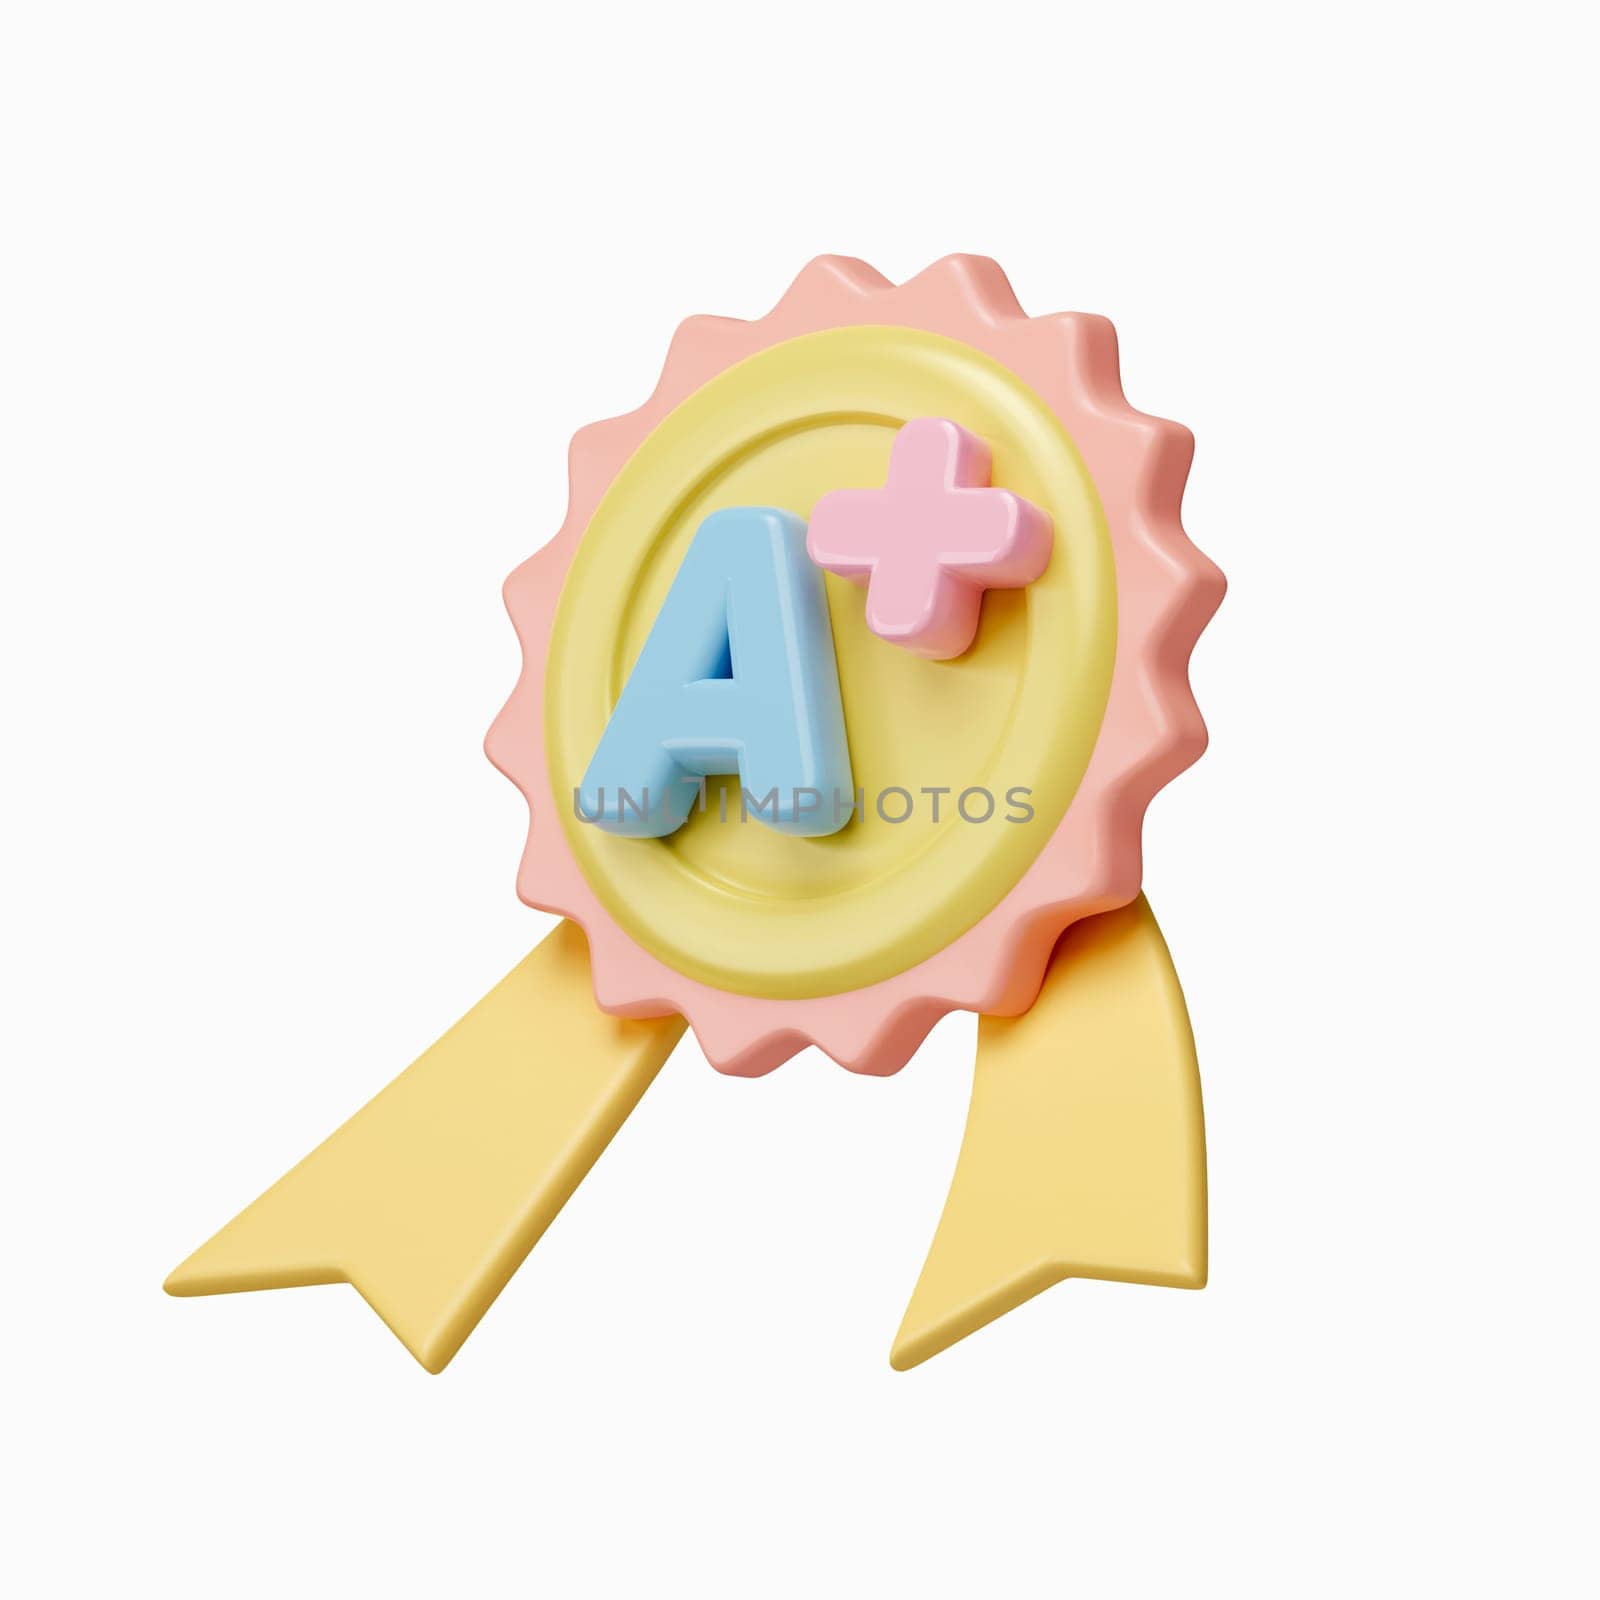 3d medal. minimal school icon. Premium quality, quality guarantee symbol. isolated on background, icon symbol clipping path. 3d render illustration.